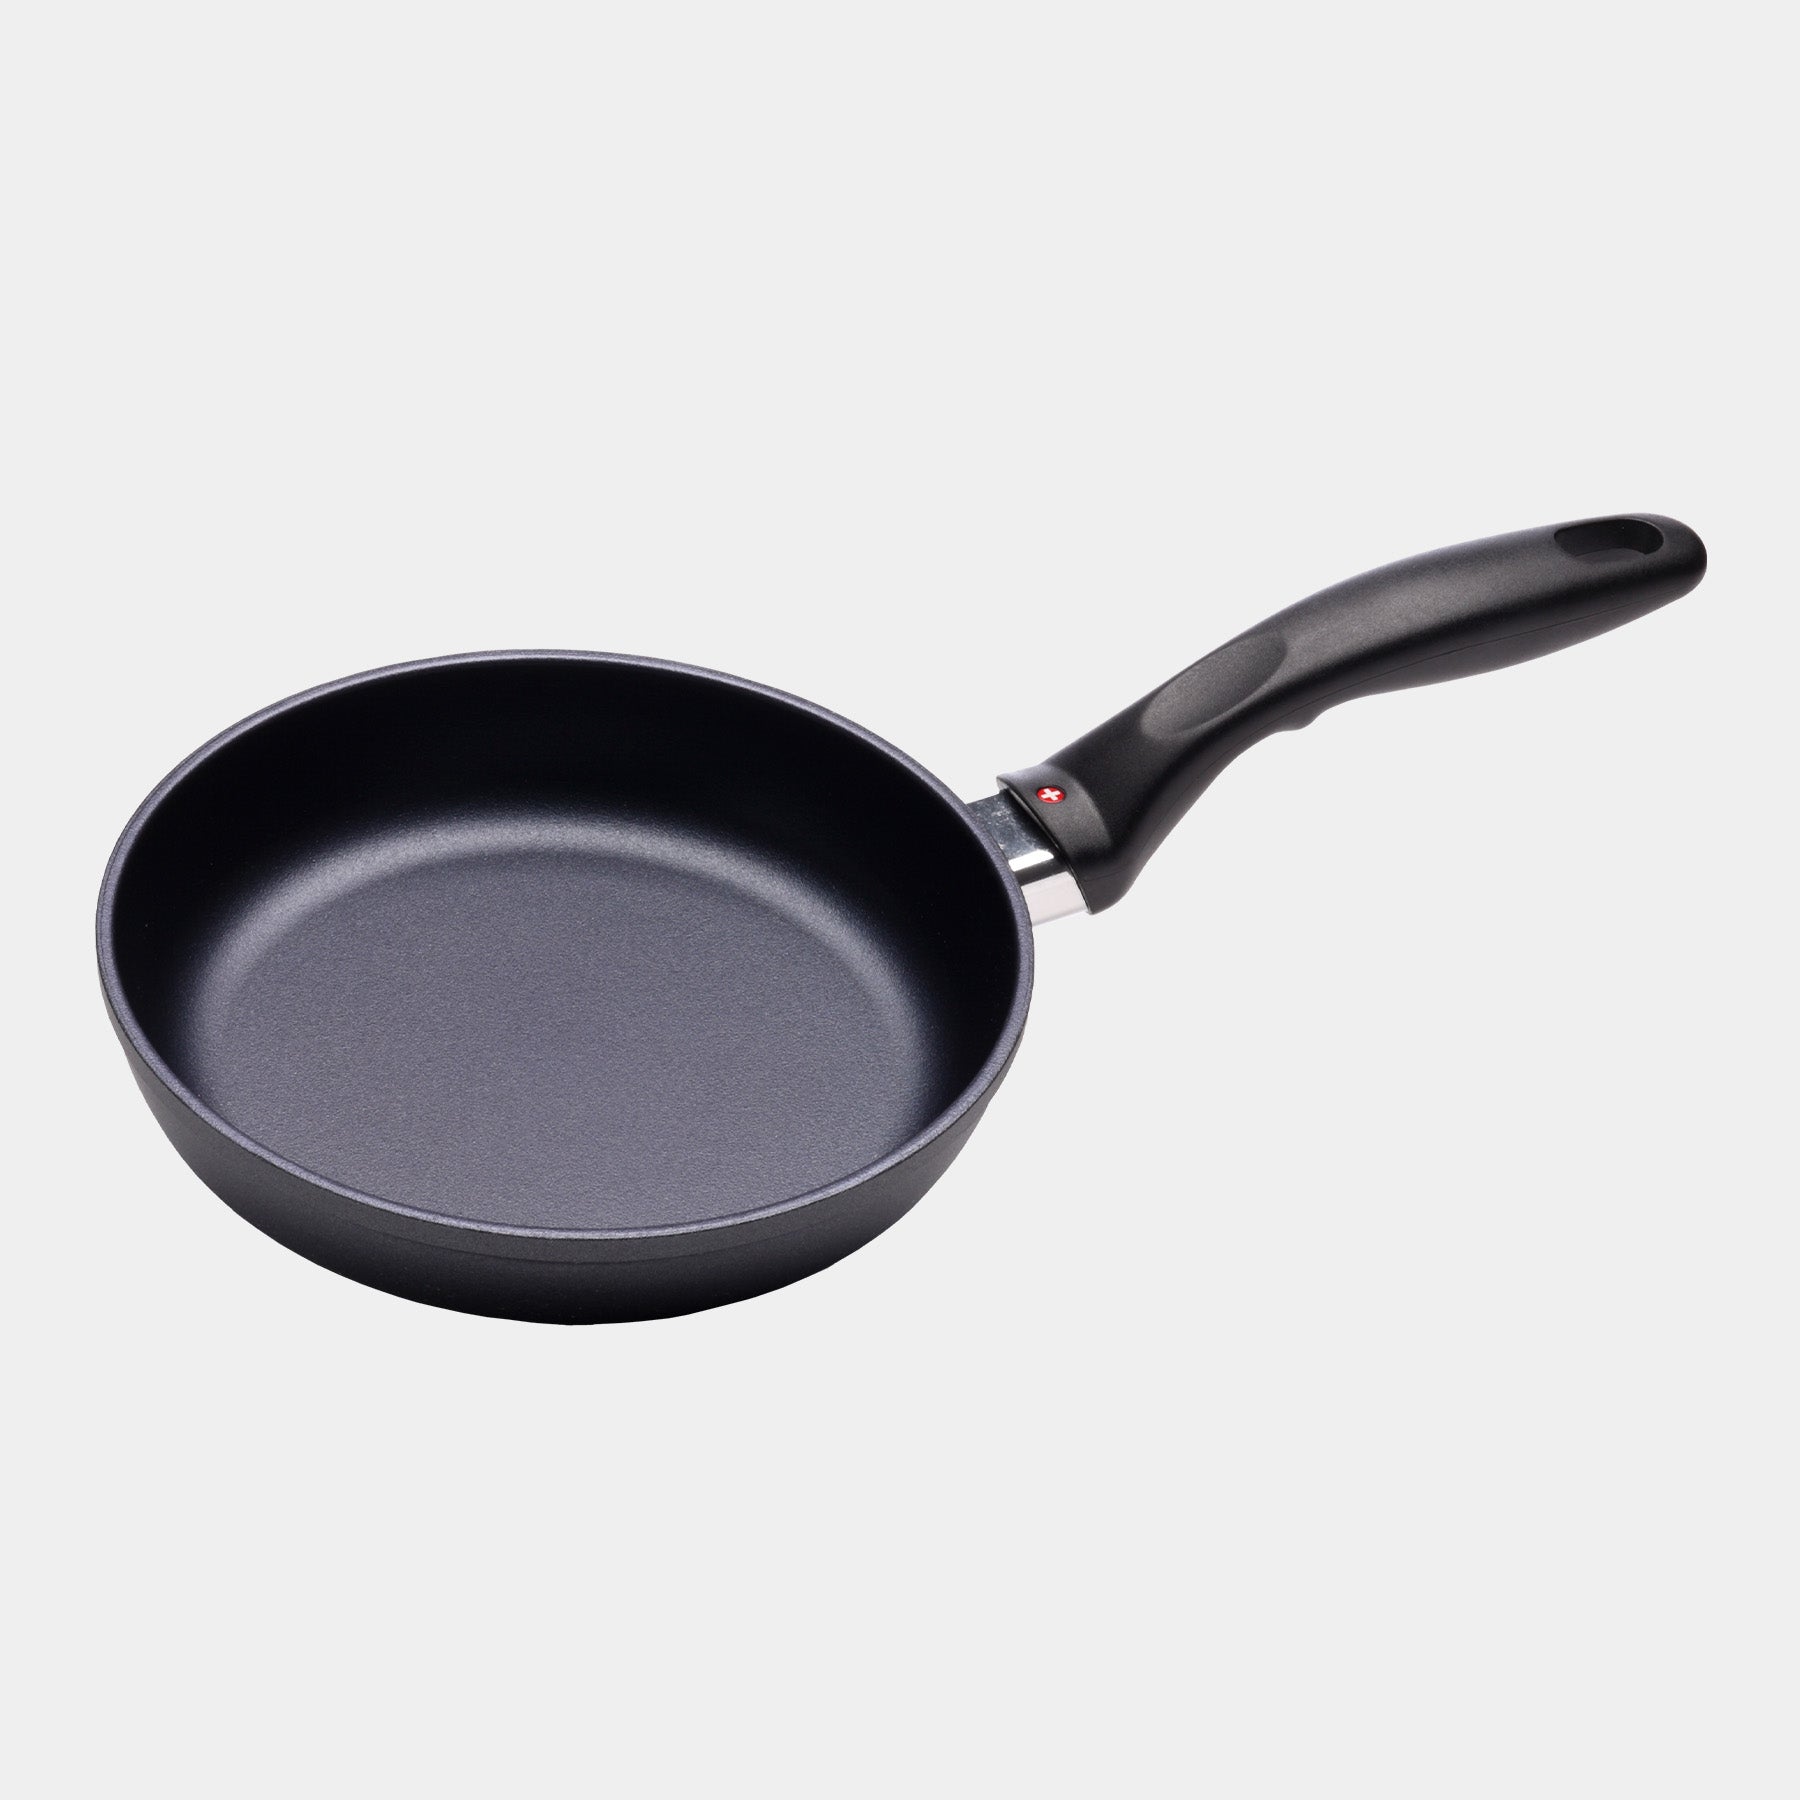 HD Nonstick 8" Fry Pan - Induction